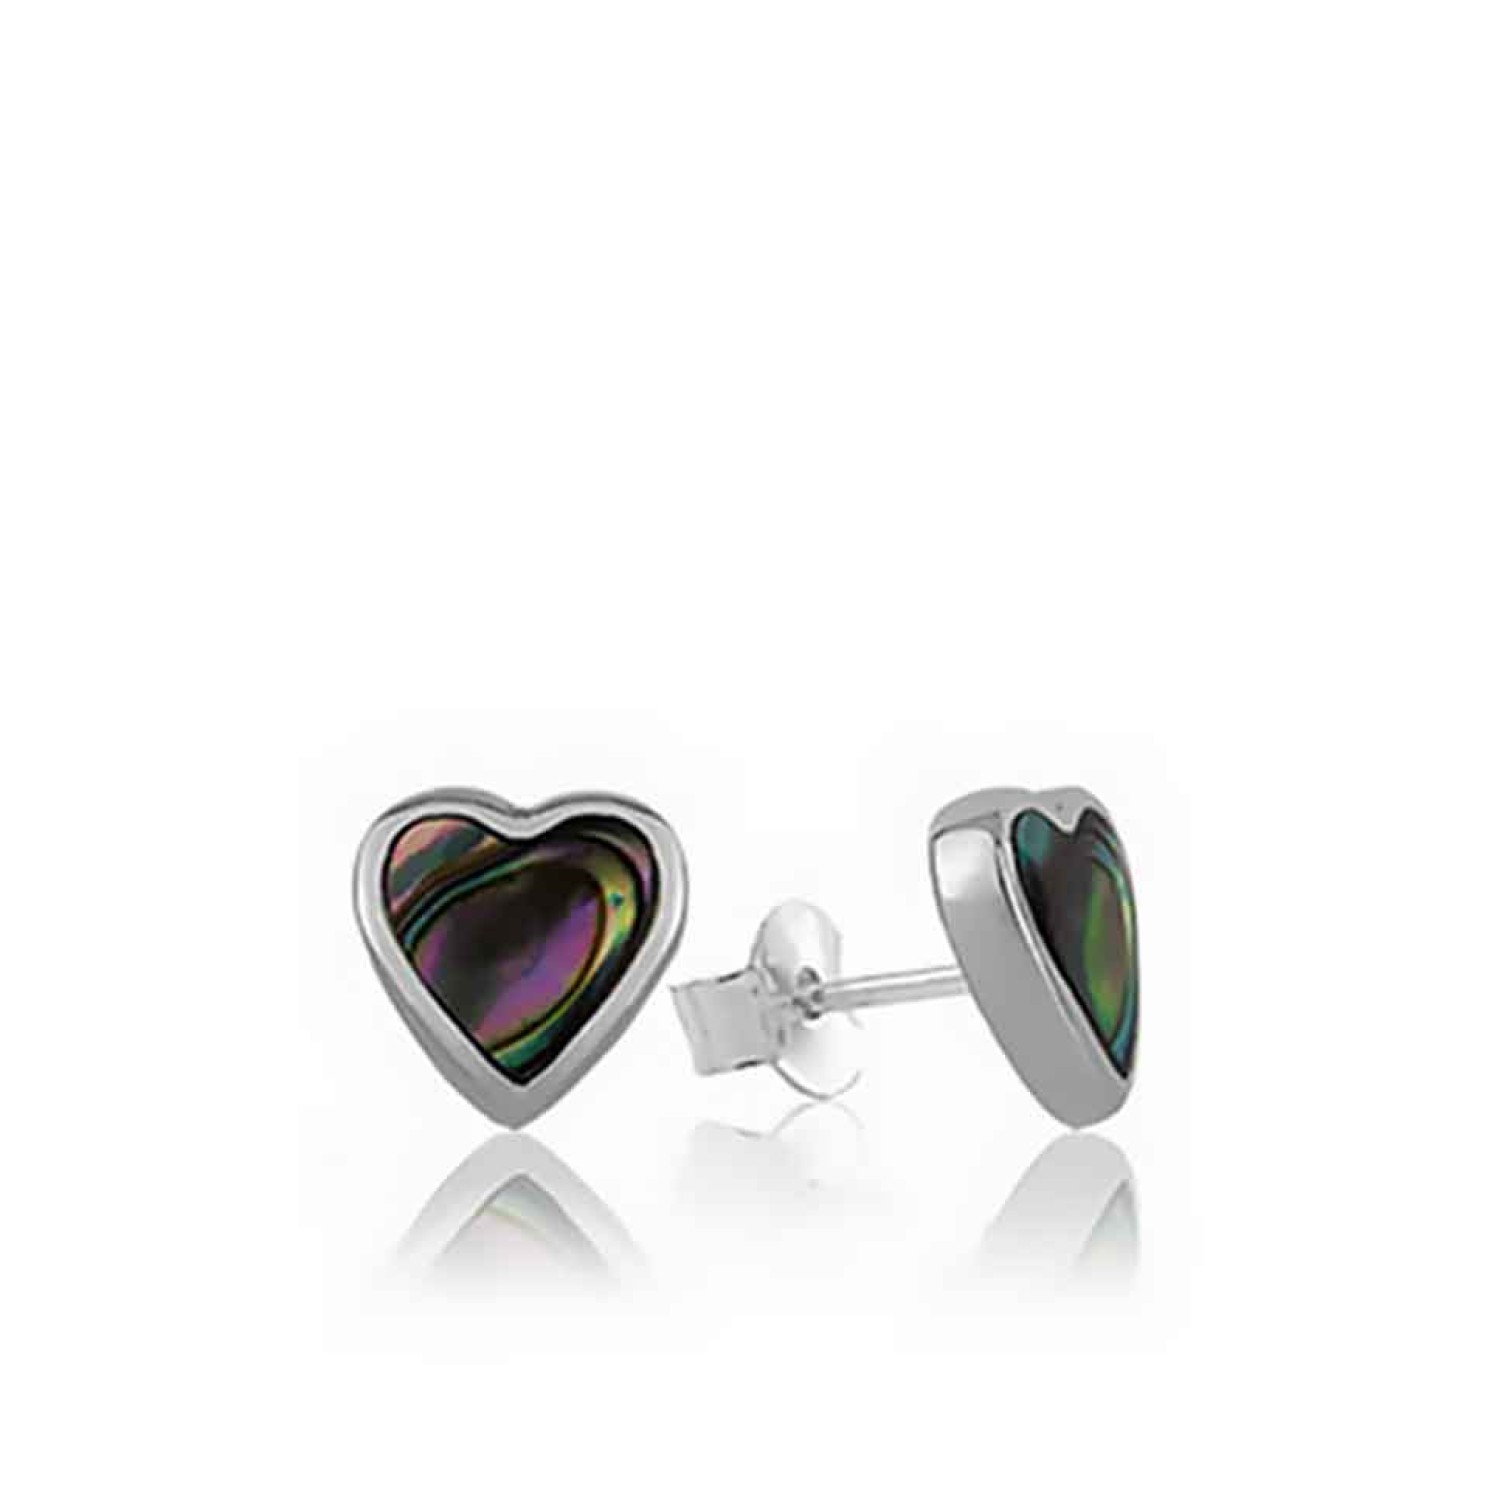 3E40005 Evolve Treasured Paua Heart Silver Studs. Evolves beautiful Pāua Heart Studs celebrate the close connection we share with those we love. It is believed pāua strengthens the heart and New Zealand pāua is considered the rarest and most beautiful in 